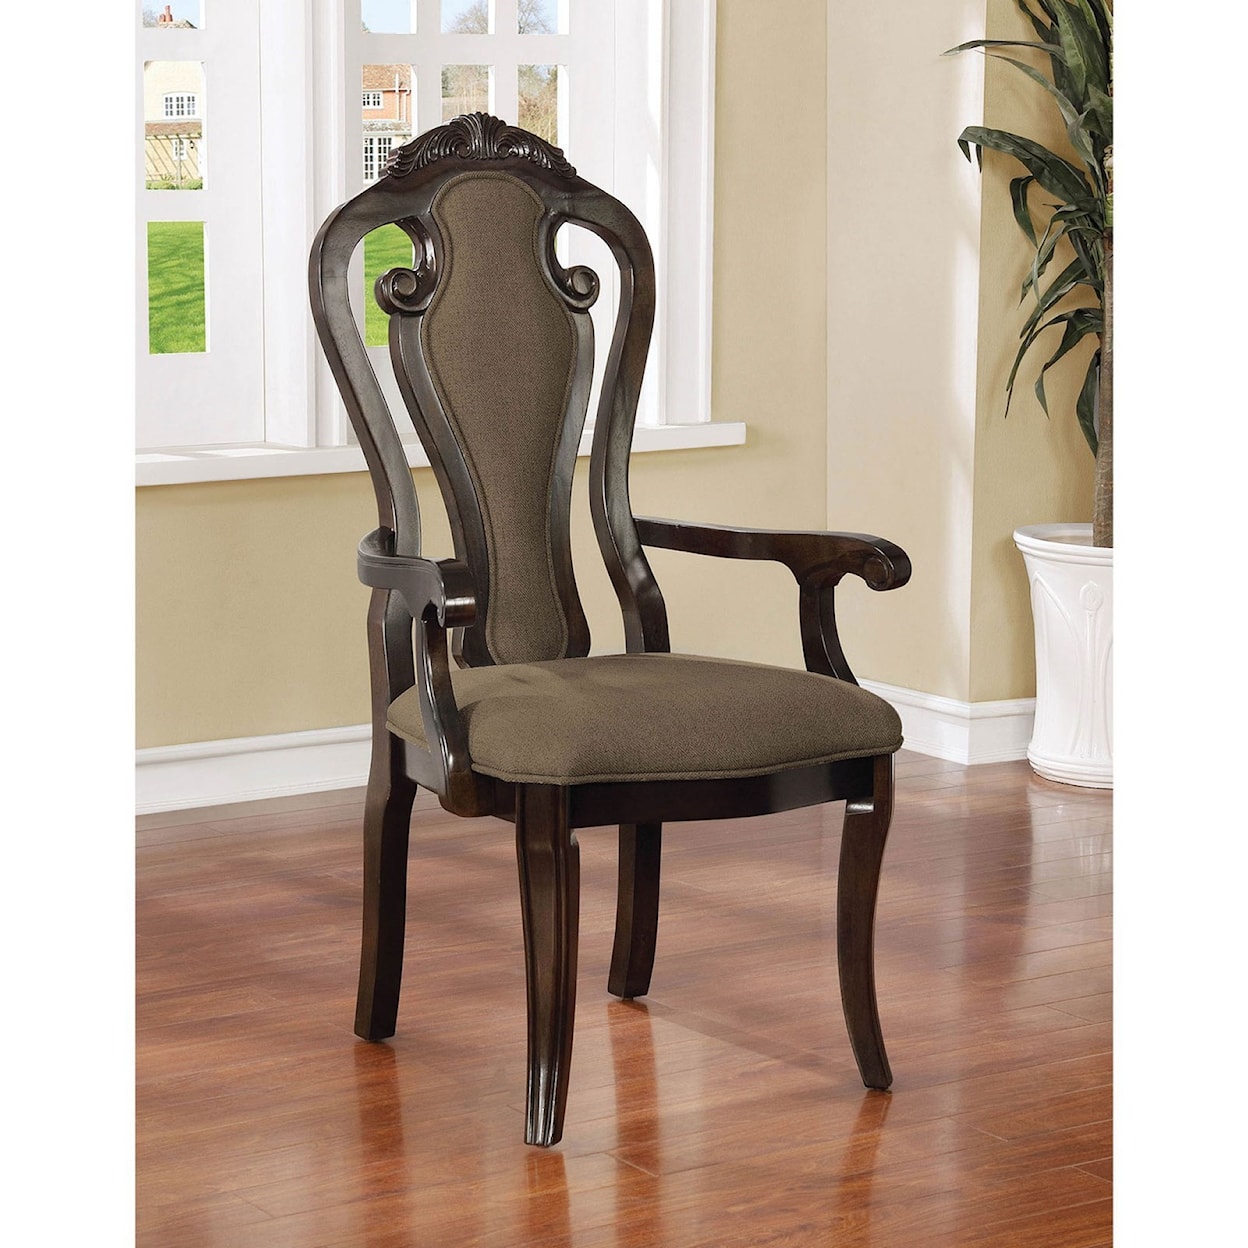 Furniture of America Rosalina Set of 2 Arm Chairs